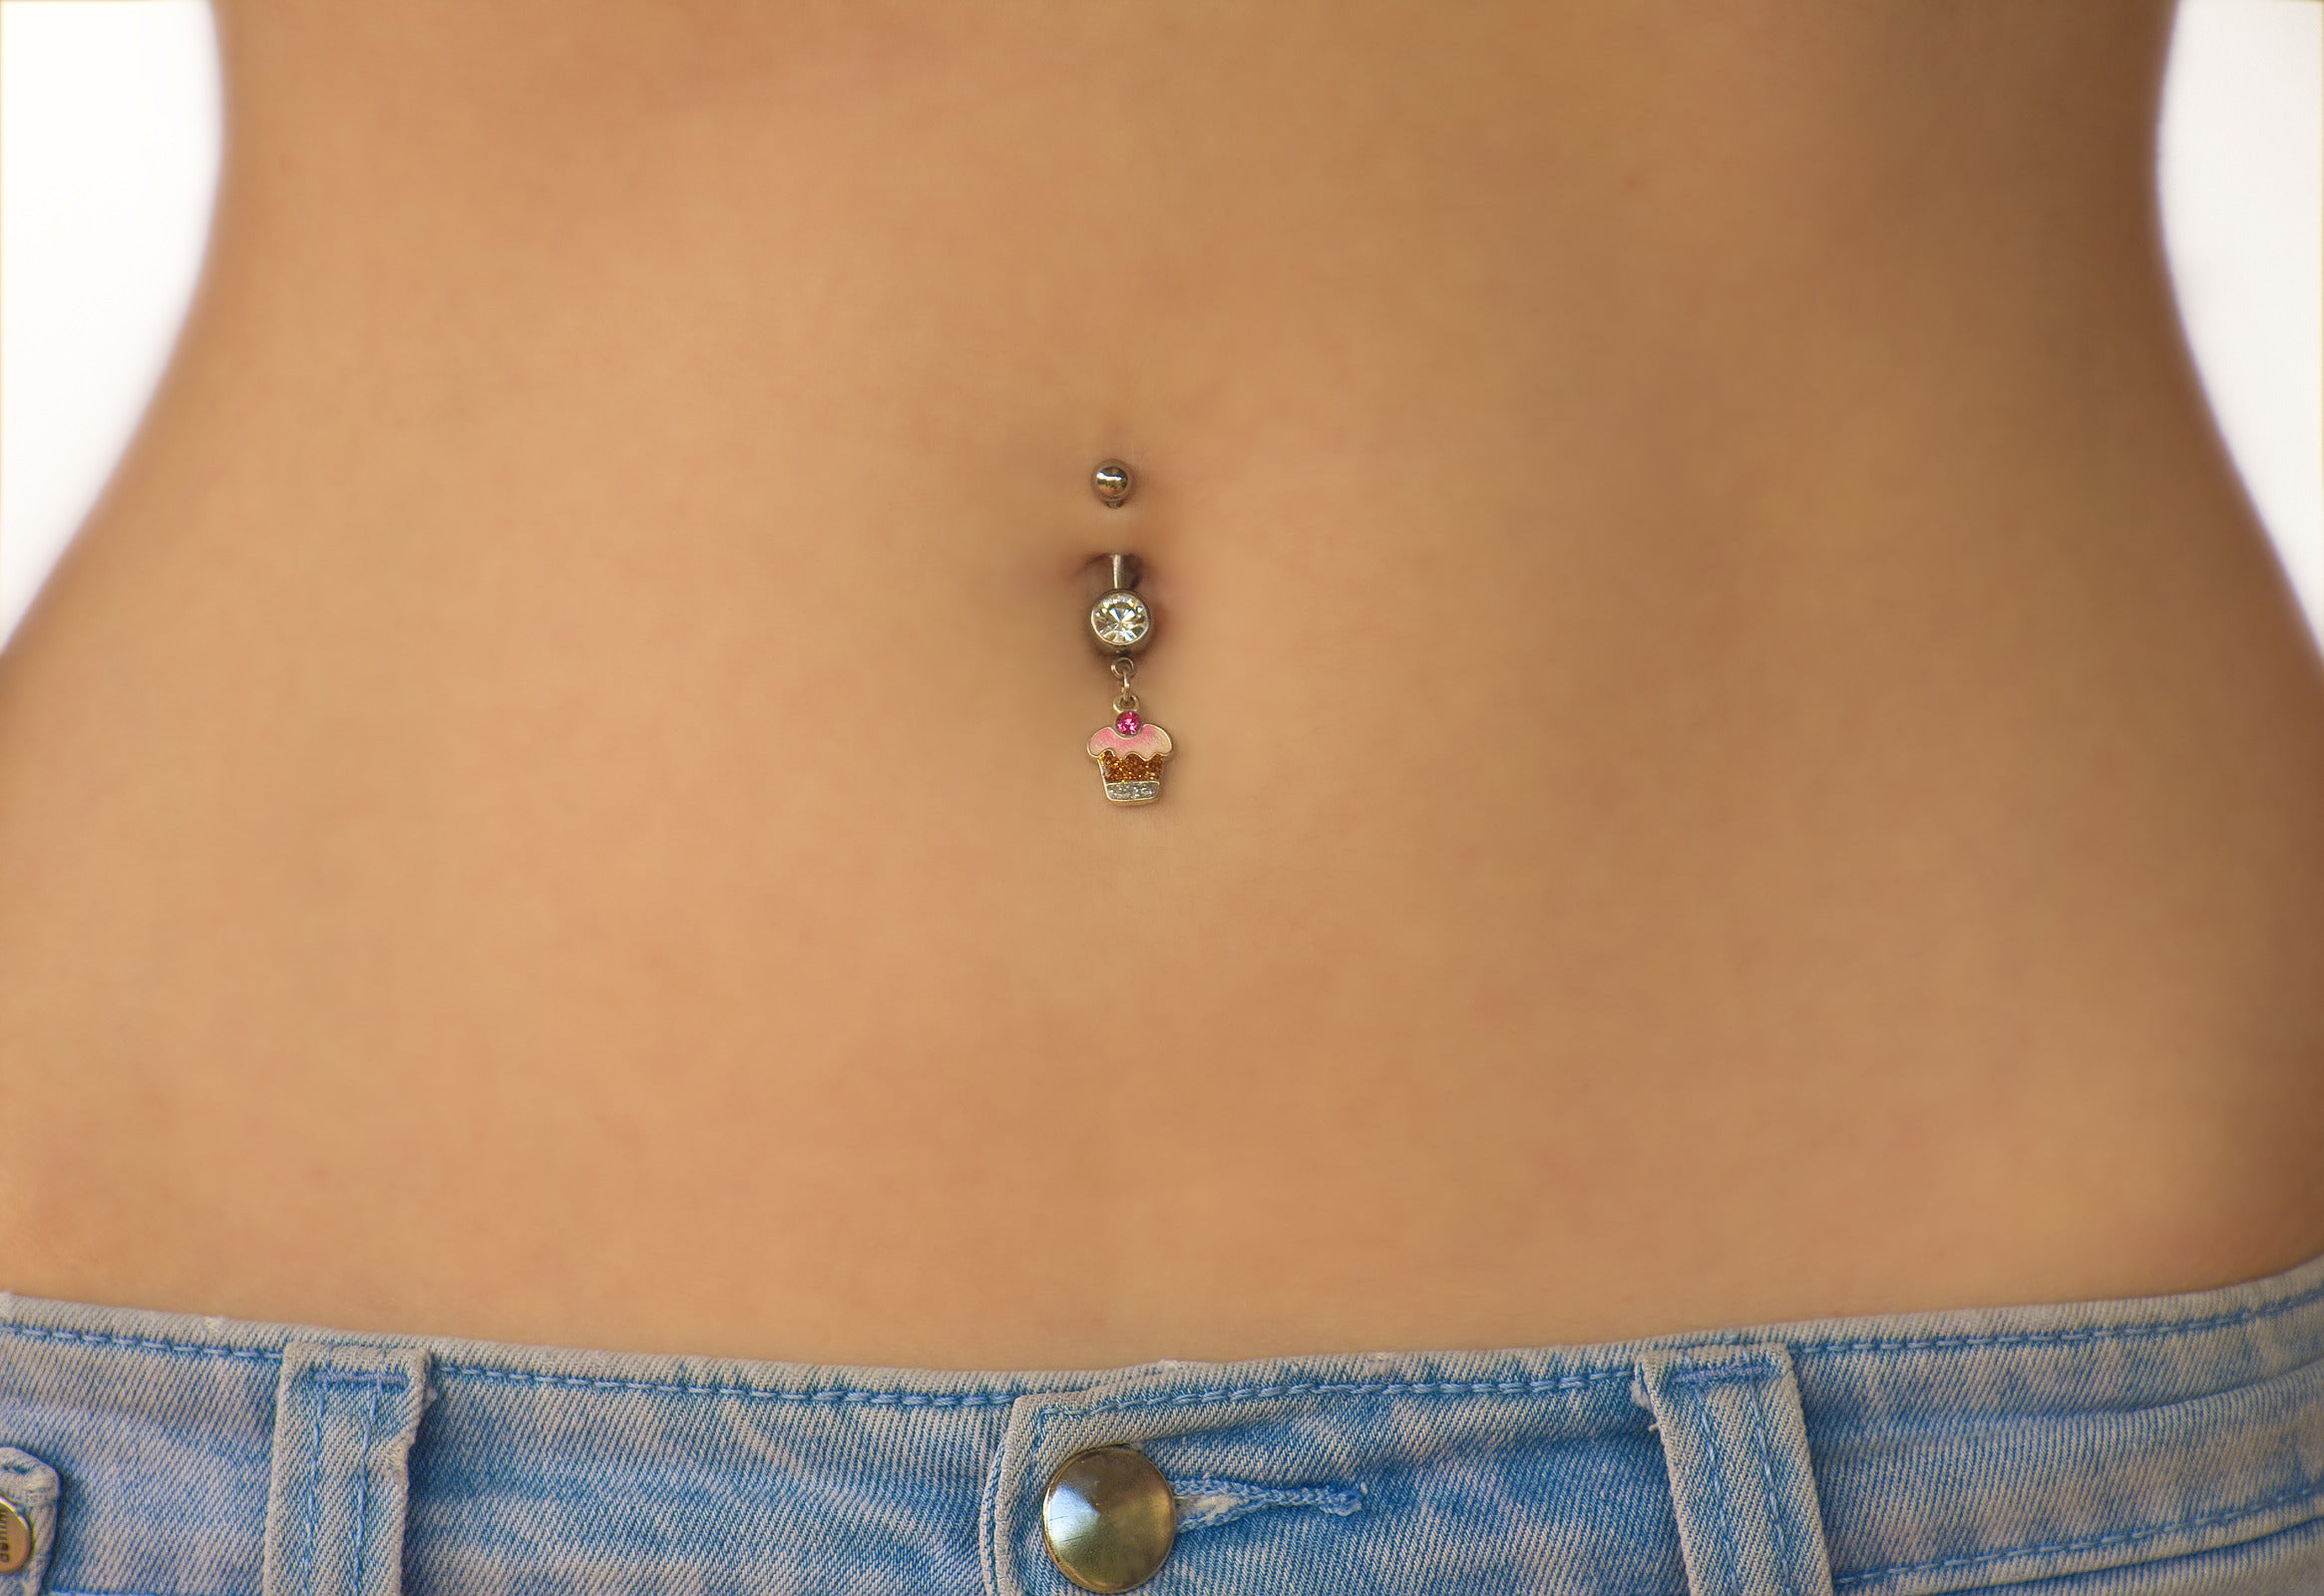 8 tips will help you avoid infection after your belly button has been pierced